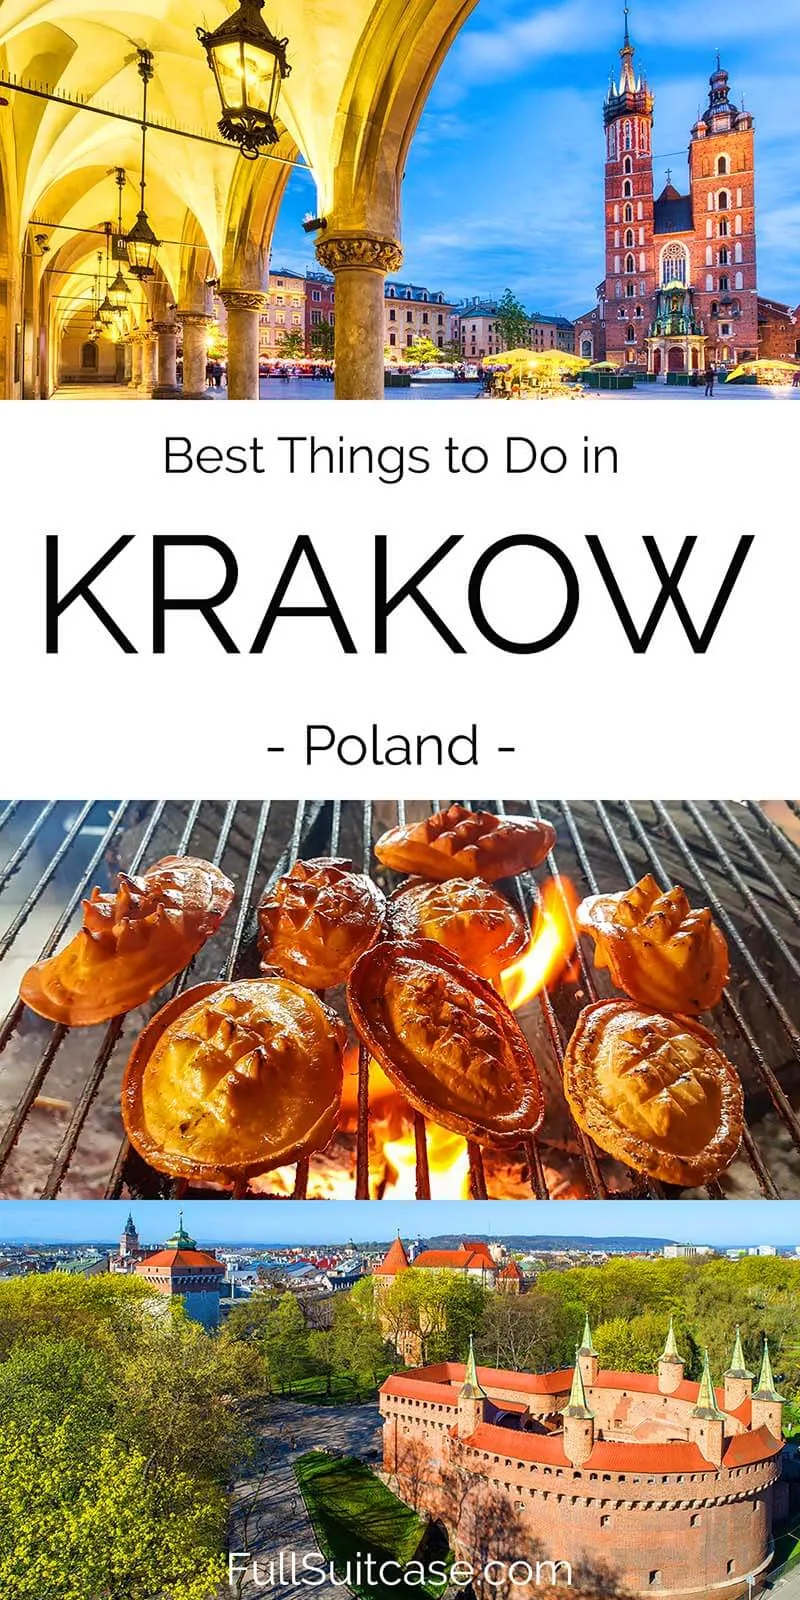 Best places to visit and things to do in Krakow (Cracow) Poland